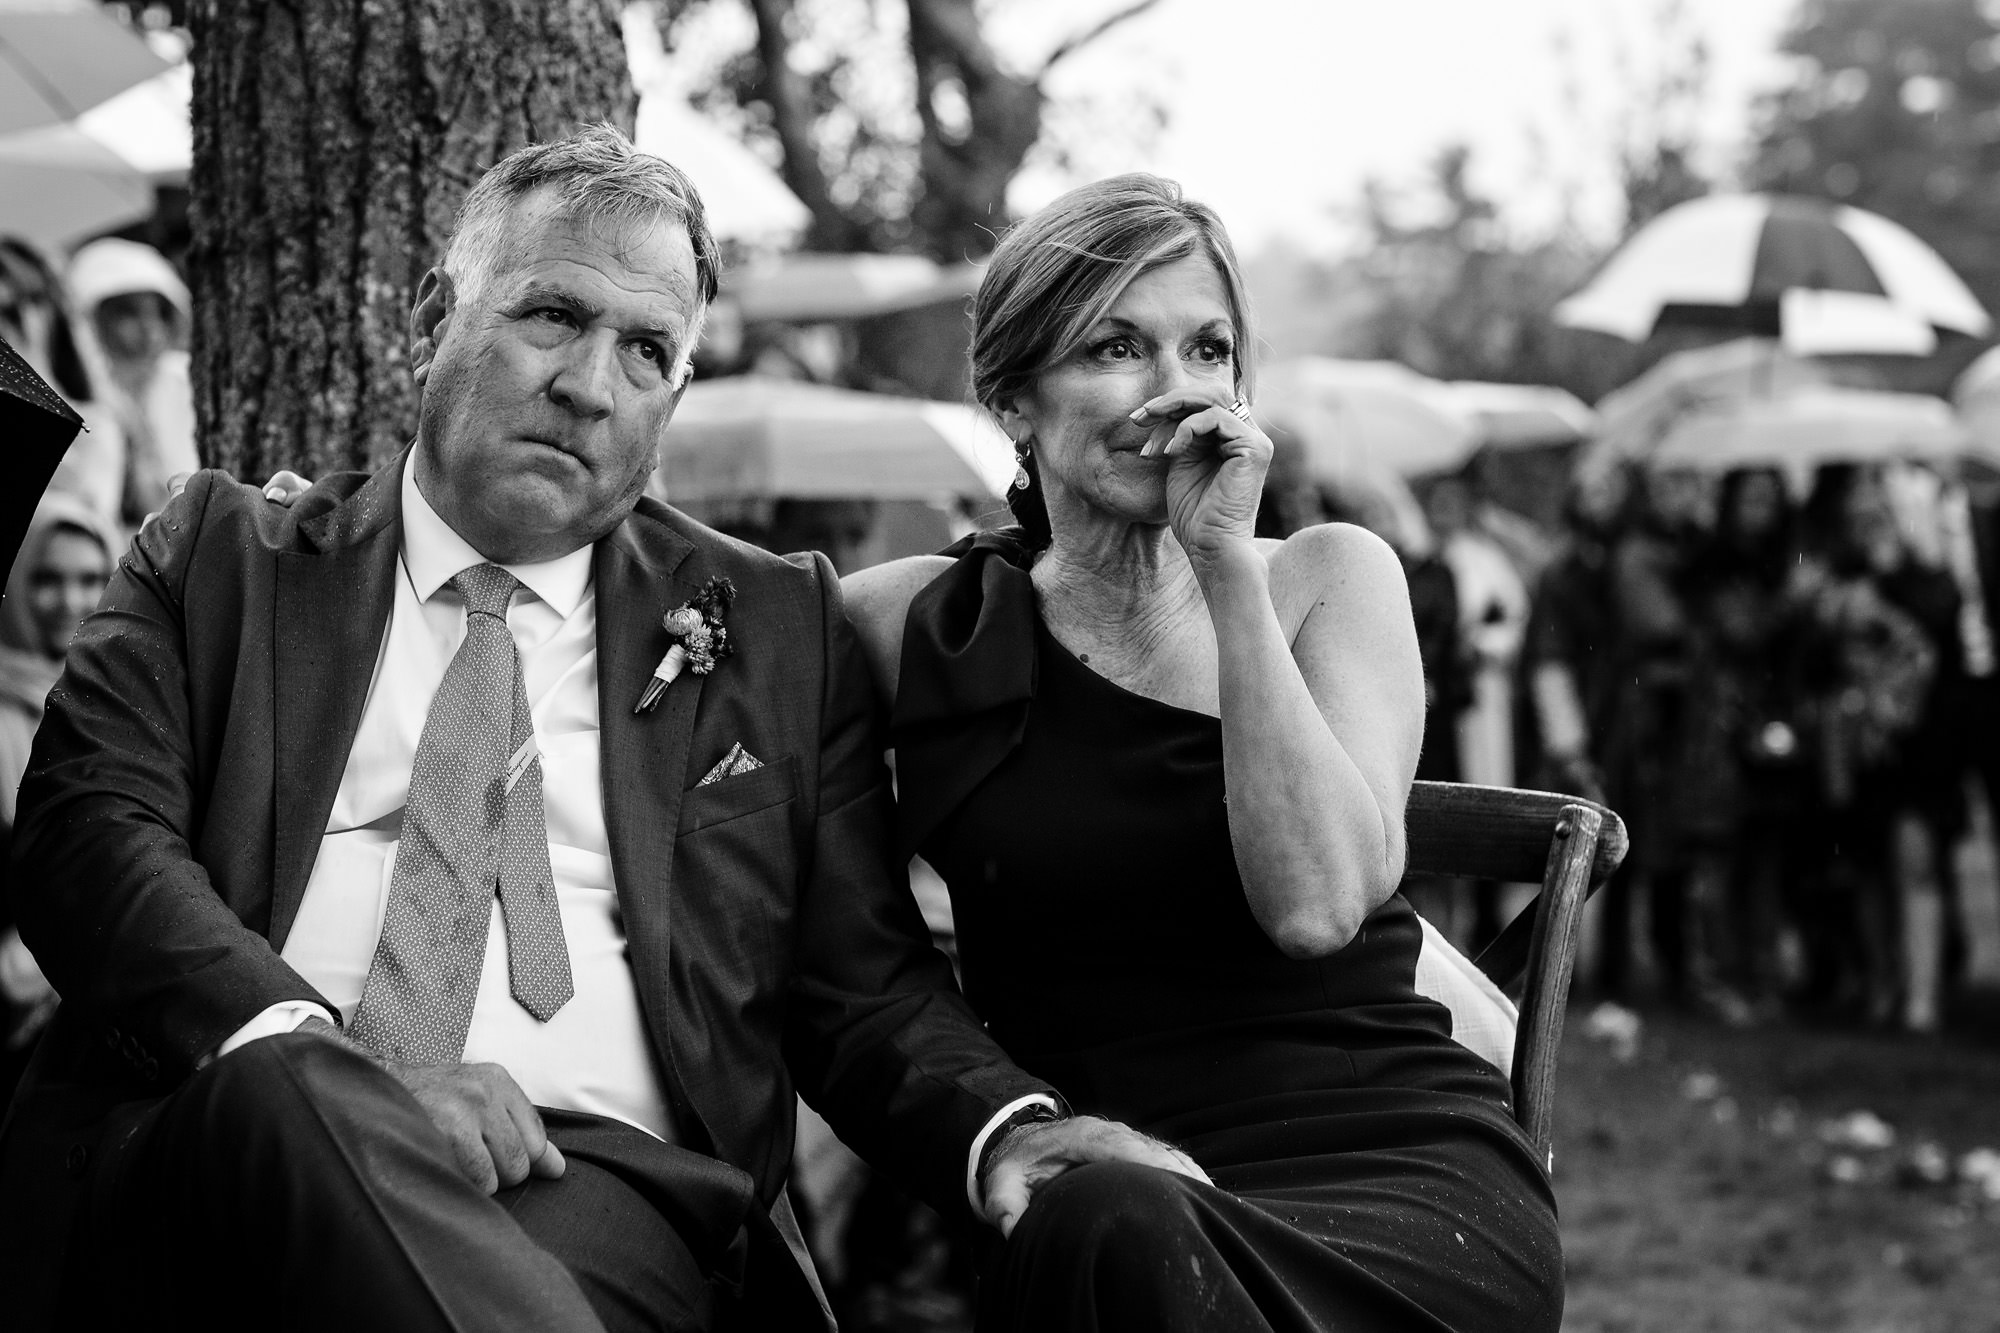 The mother of the groom cries during the vows at a Blue Hill Country Club wedding